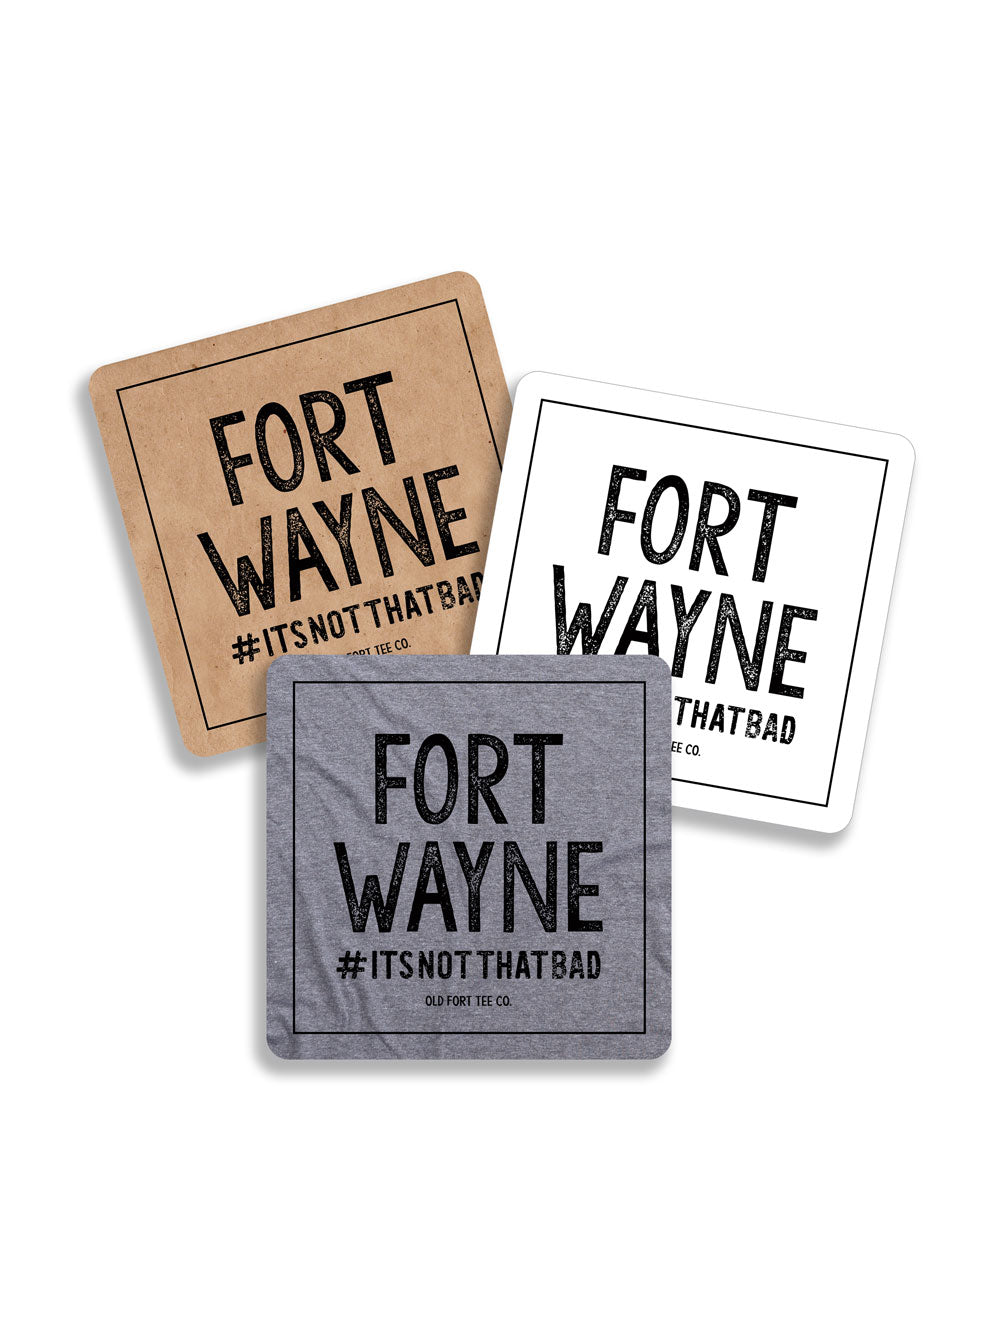 Fort Wayne #itsnotthatbad three magnets in white, tan, and gray